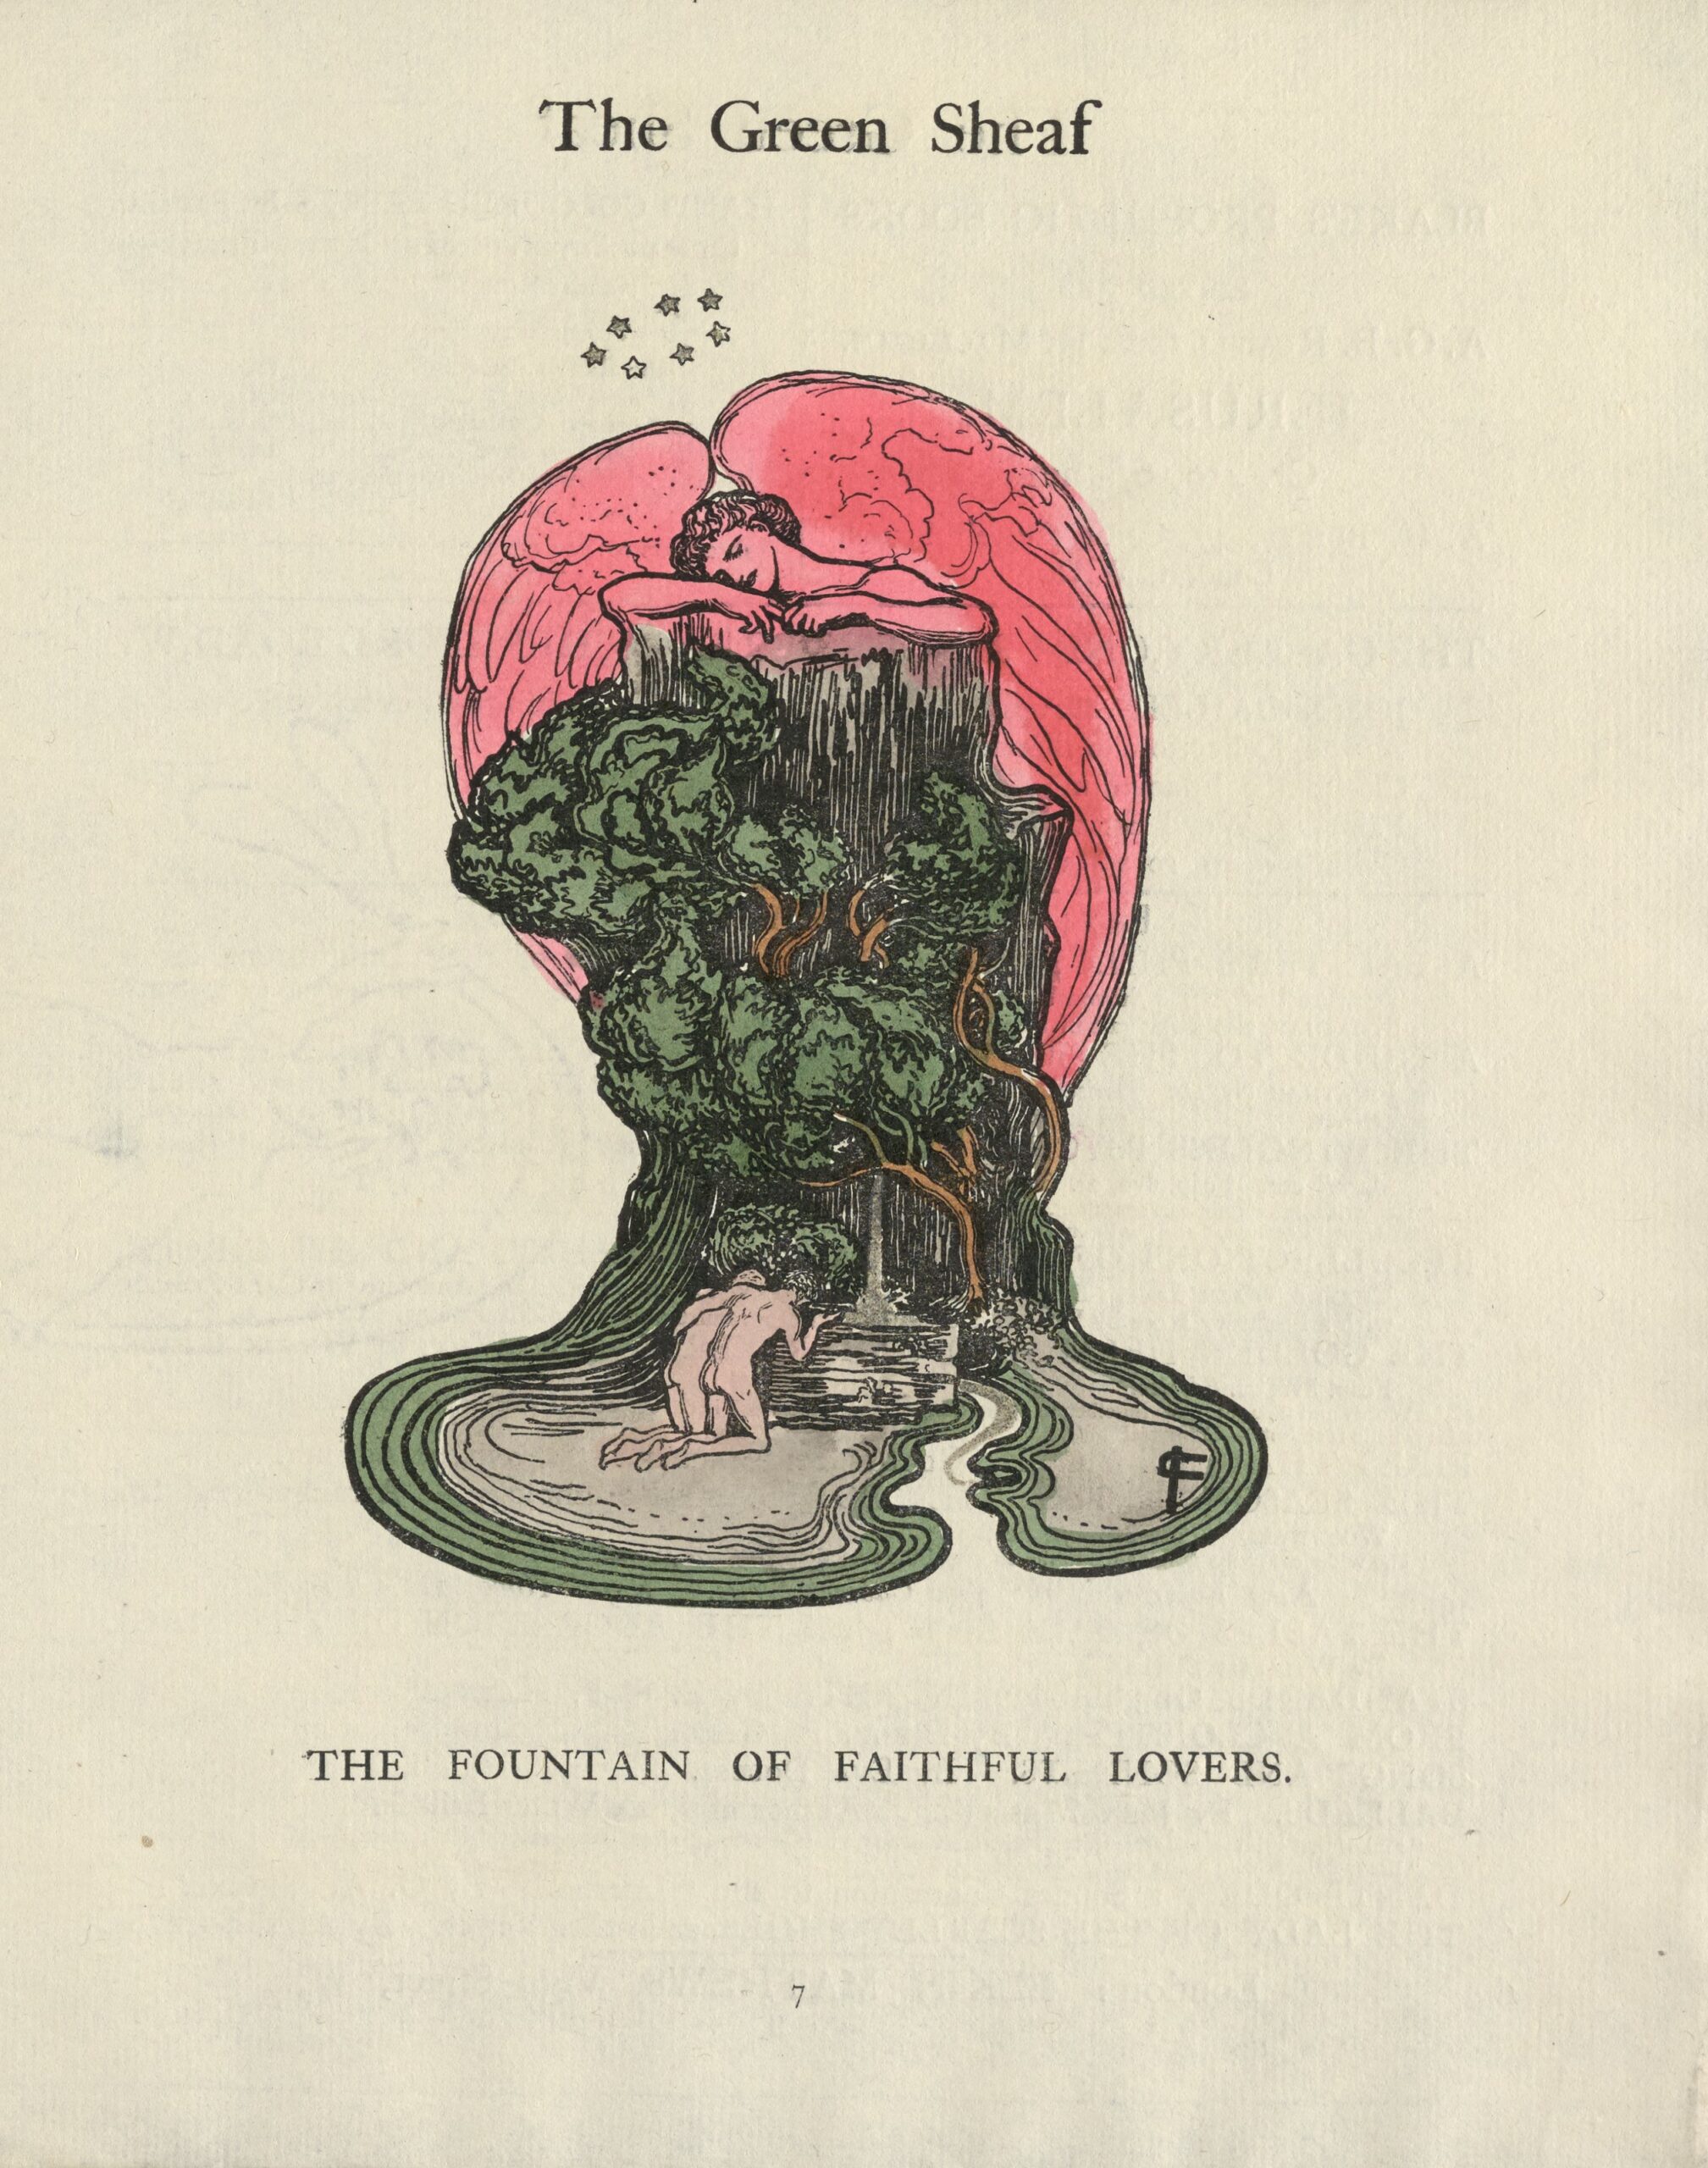 Figure 3. Cecil French, "The Fountain of Faithful Lovers," The Green                        Sheaf, No. 10, 1904, p. 7.